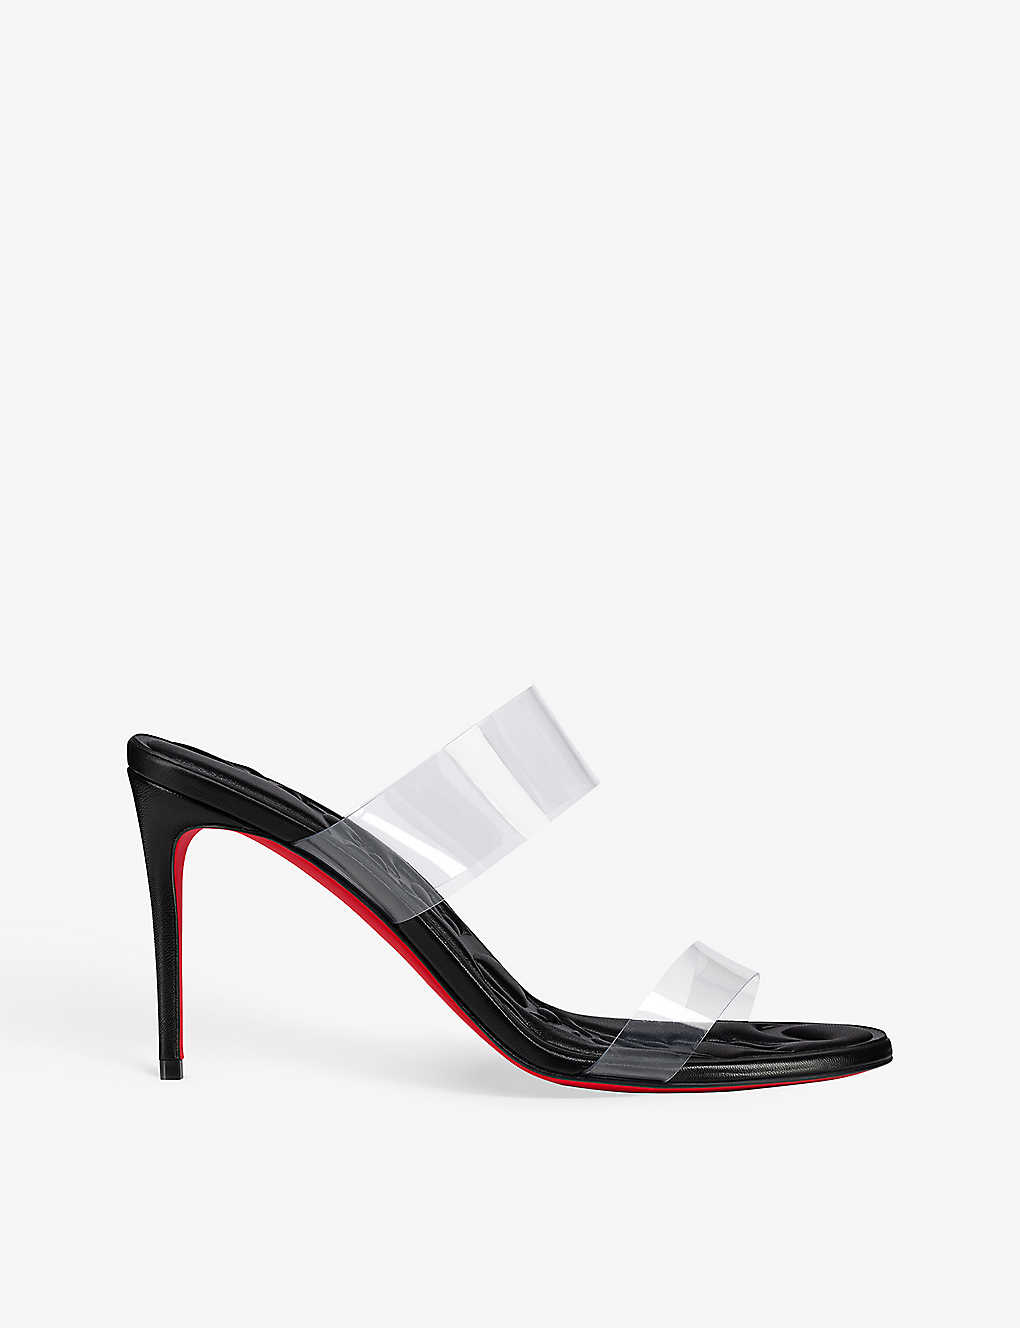 Shop Christian Louboutin Just Loubi 85 Patent-leather And Pvc Sandals In Black/lin Black